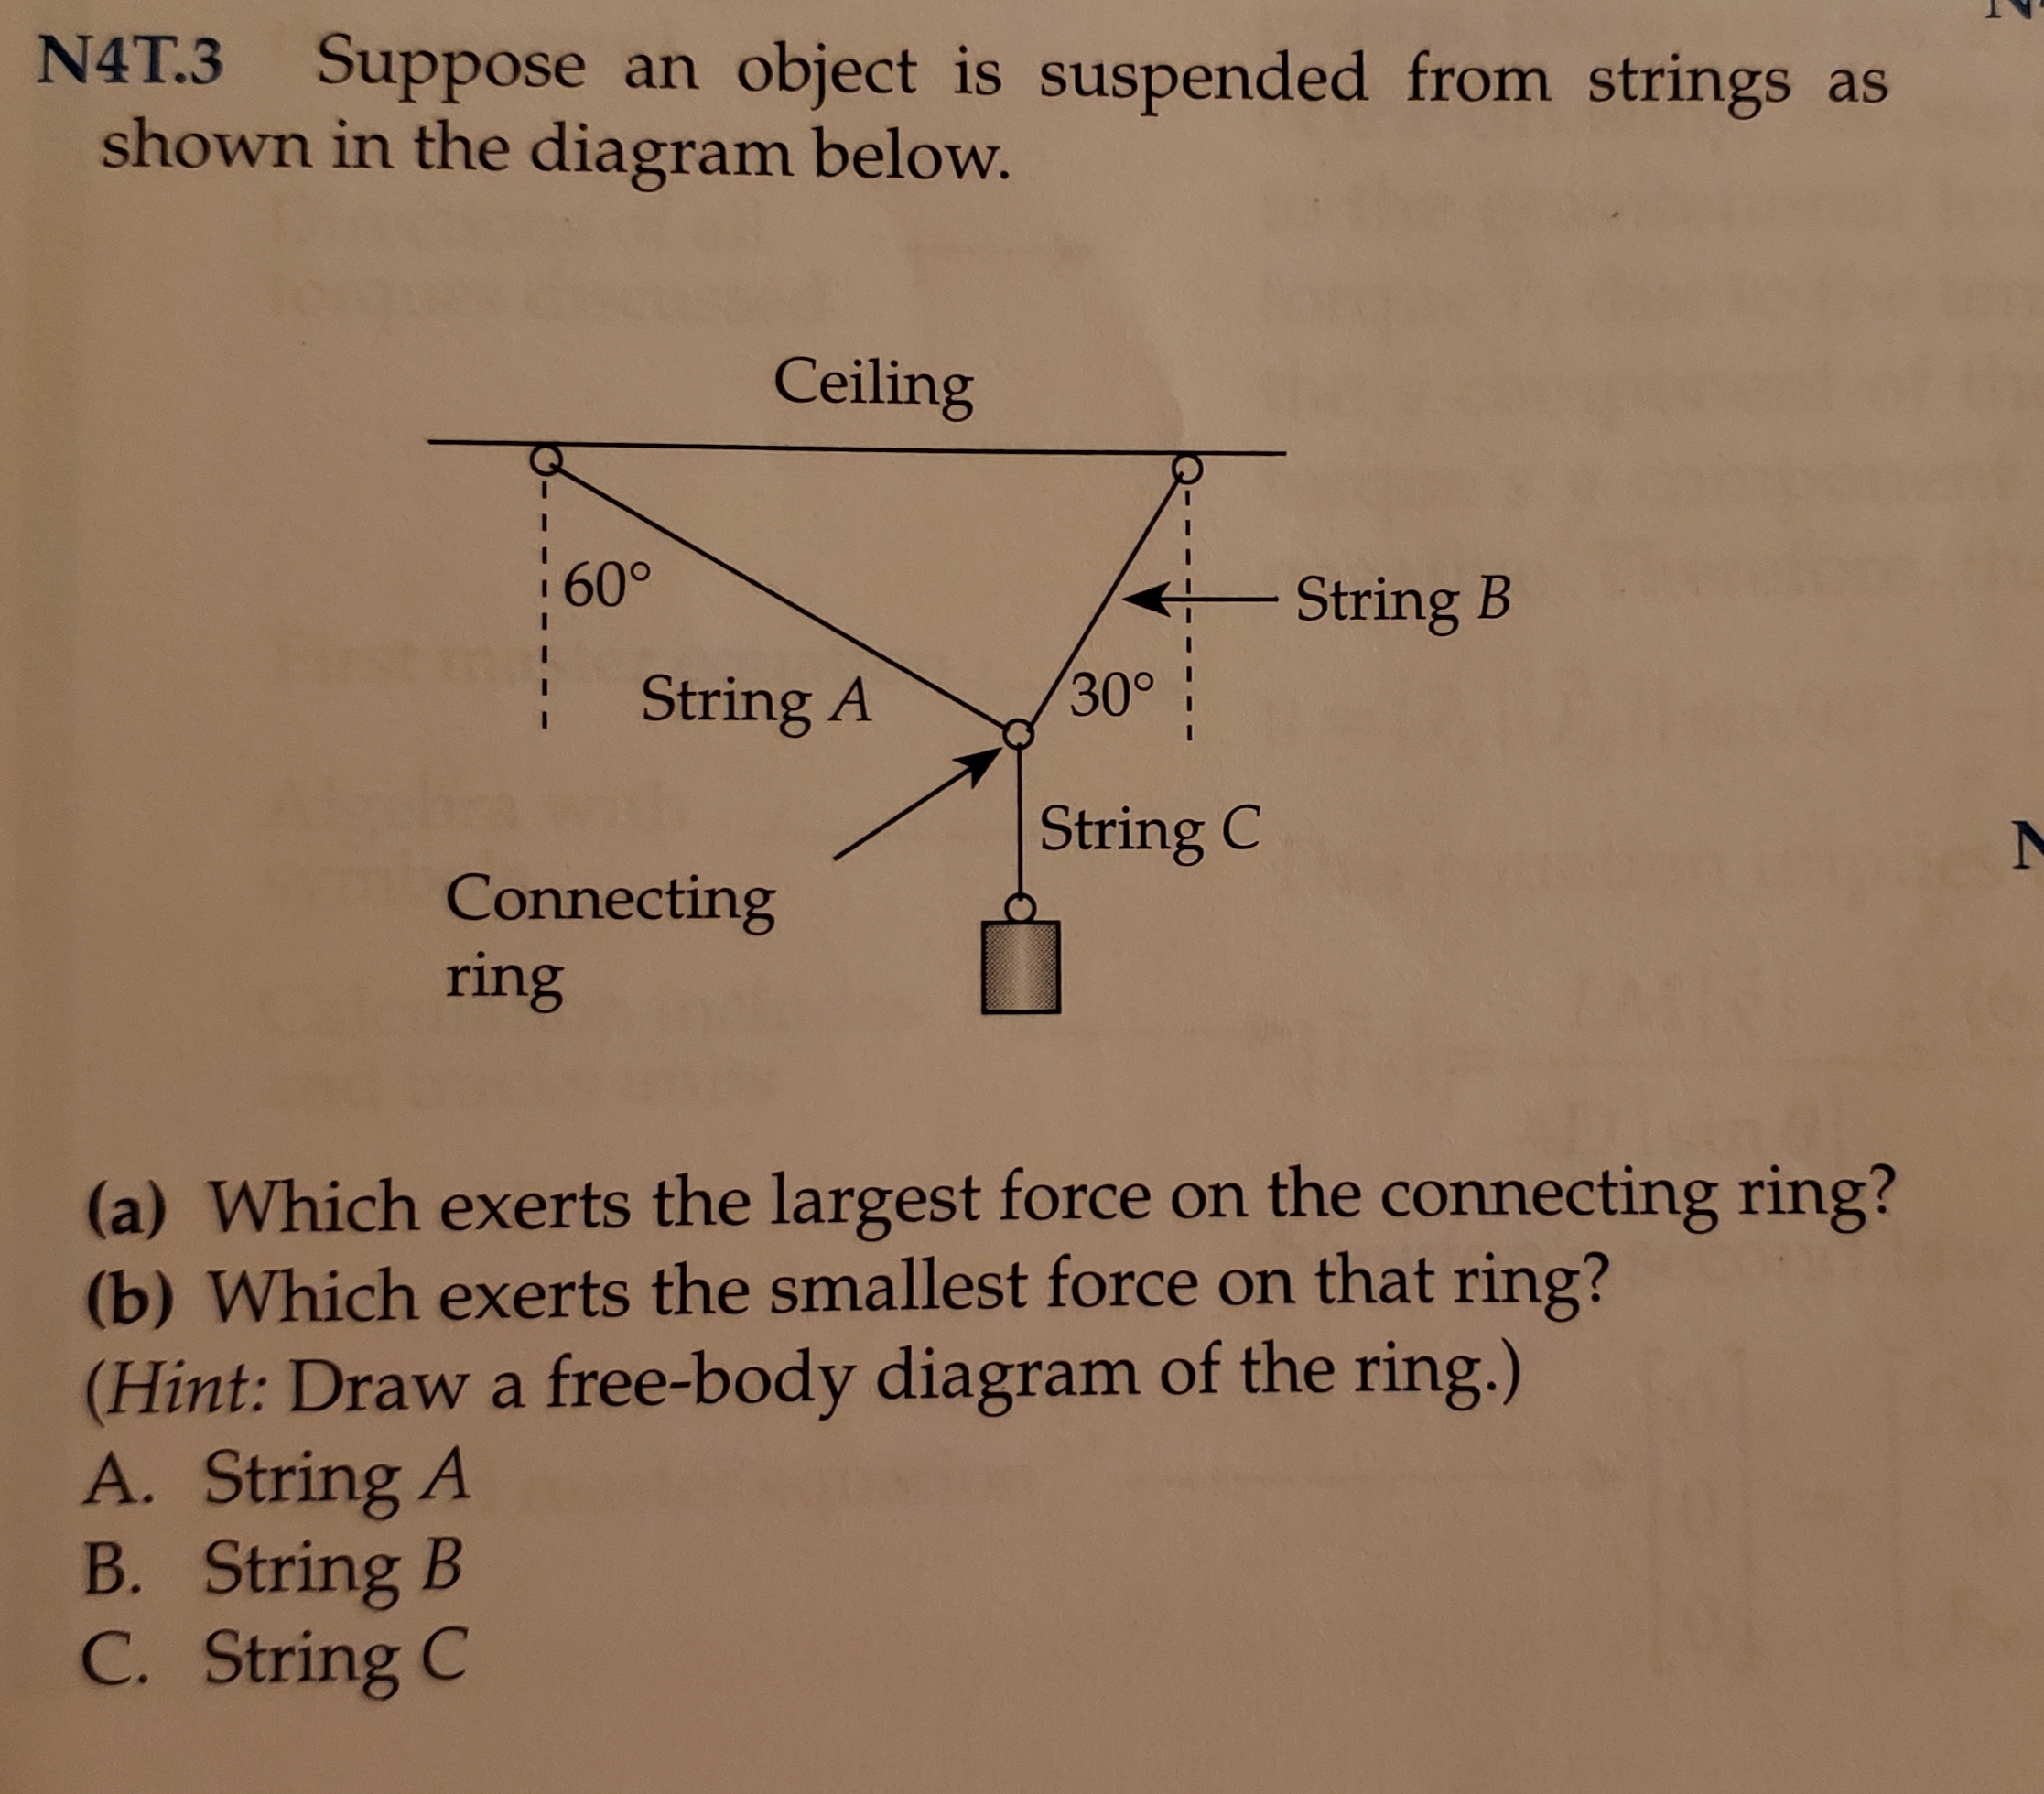 N4T.3
Suppose an object is suspended from strings as
shown in the diagram below.
Ceiling
60°
String B
30°
String A
String C
Connecting
ring
(a) Which exerts the largest force on the connecting ring?
(b) Which exerts the smallest force on that ring?
(Hint: Draw a free-body diagram of the ring.)
A. String A
B. String B
C. String C
